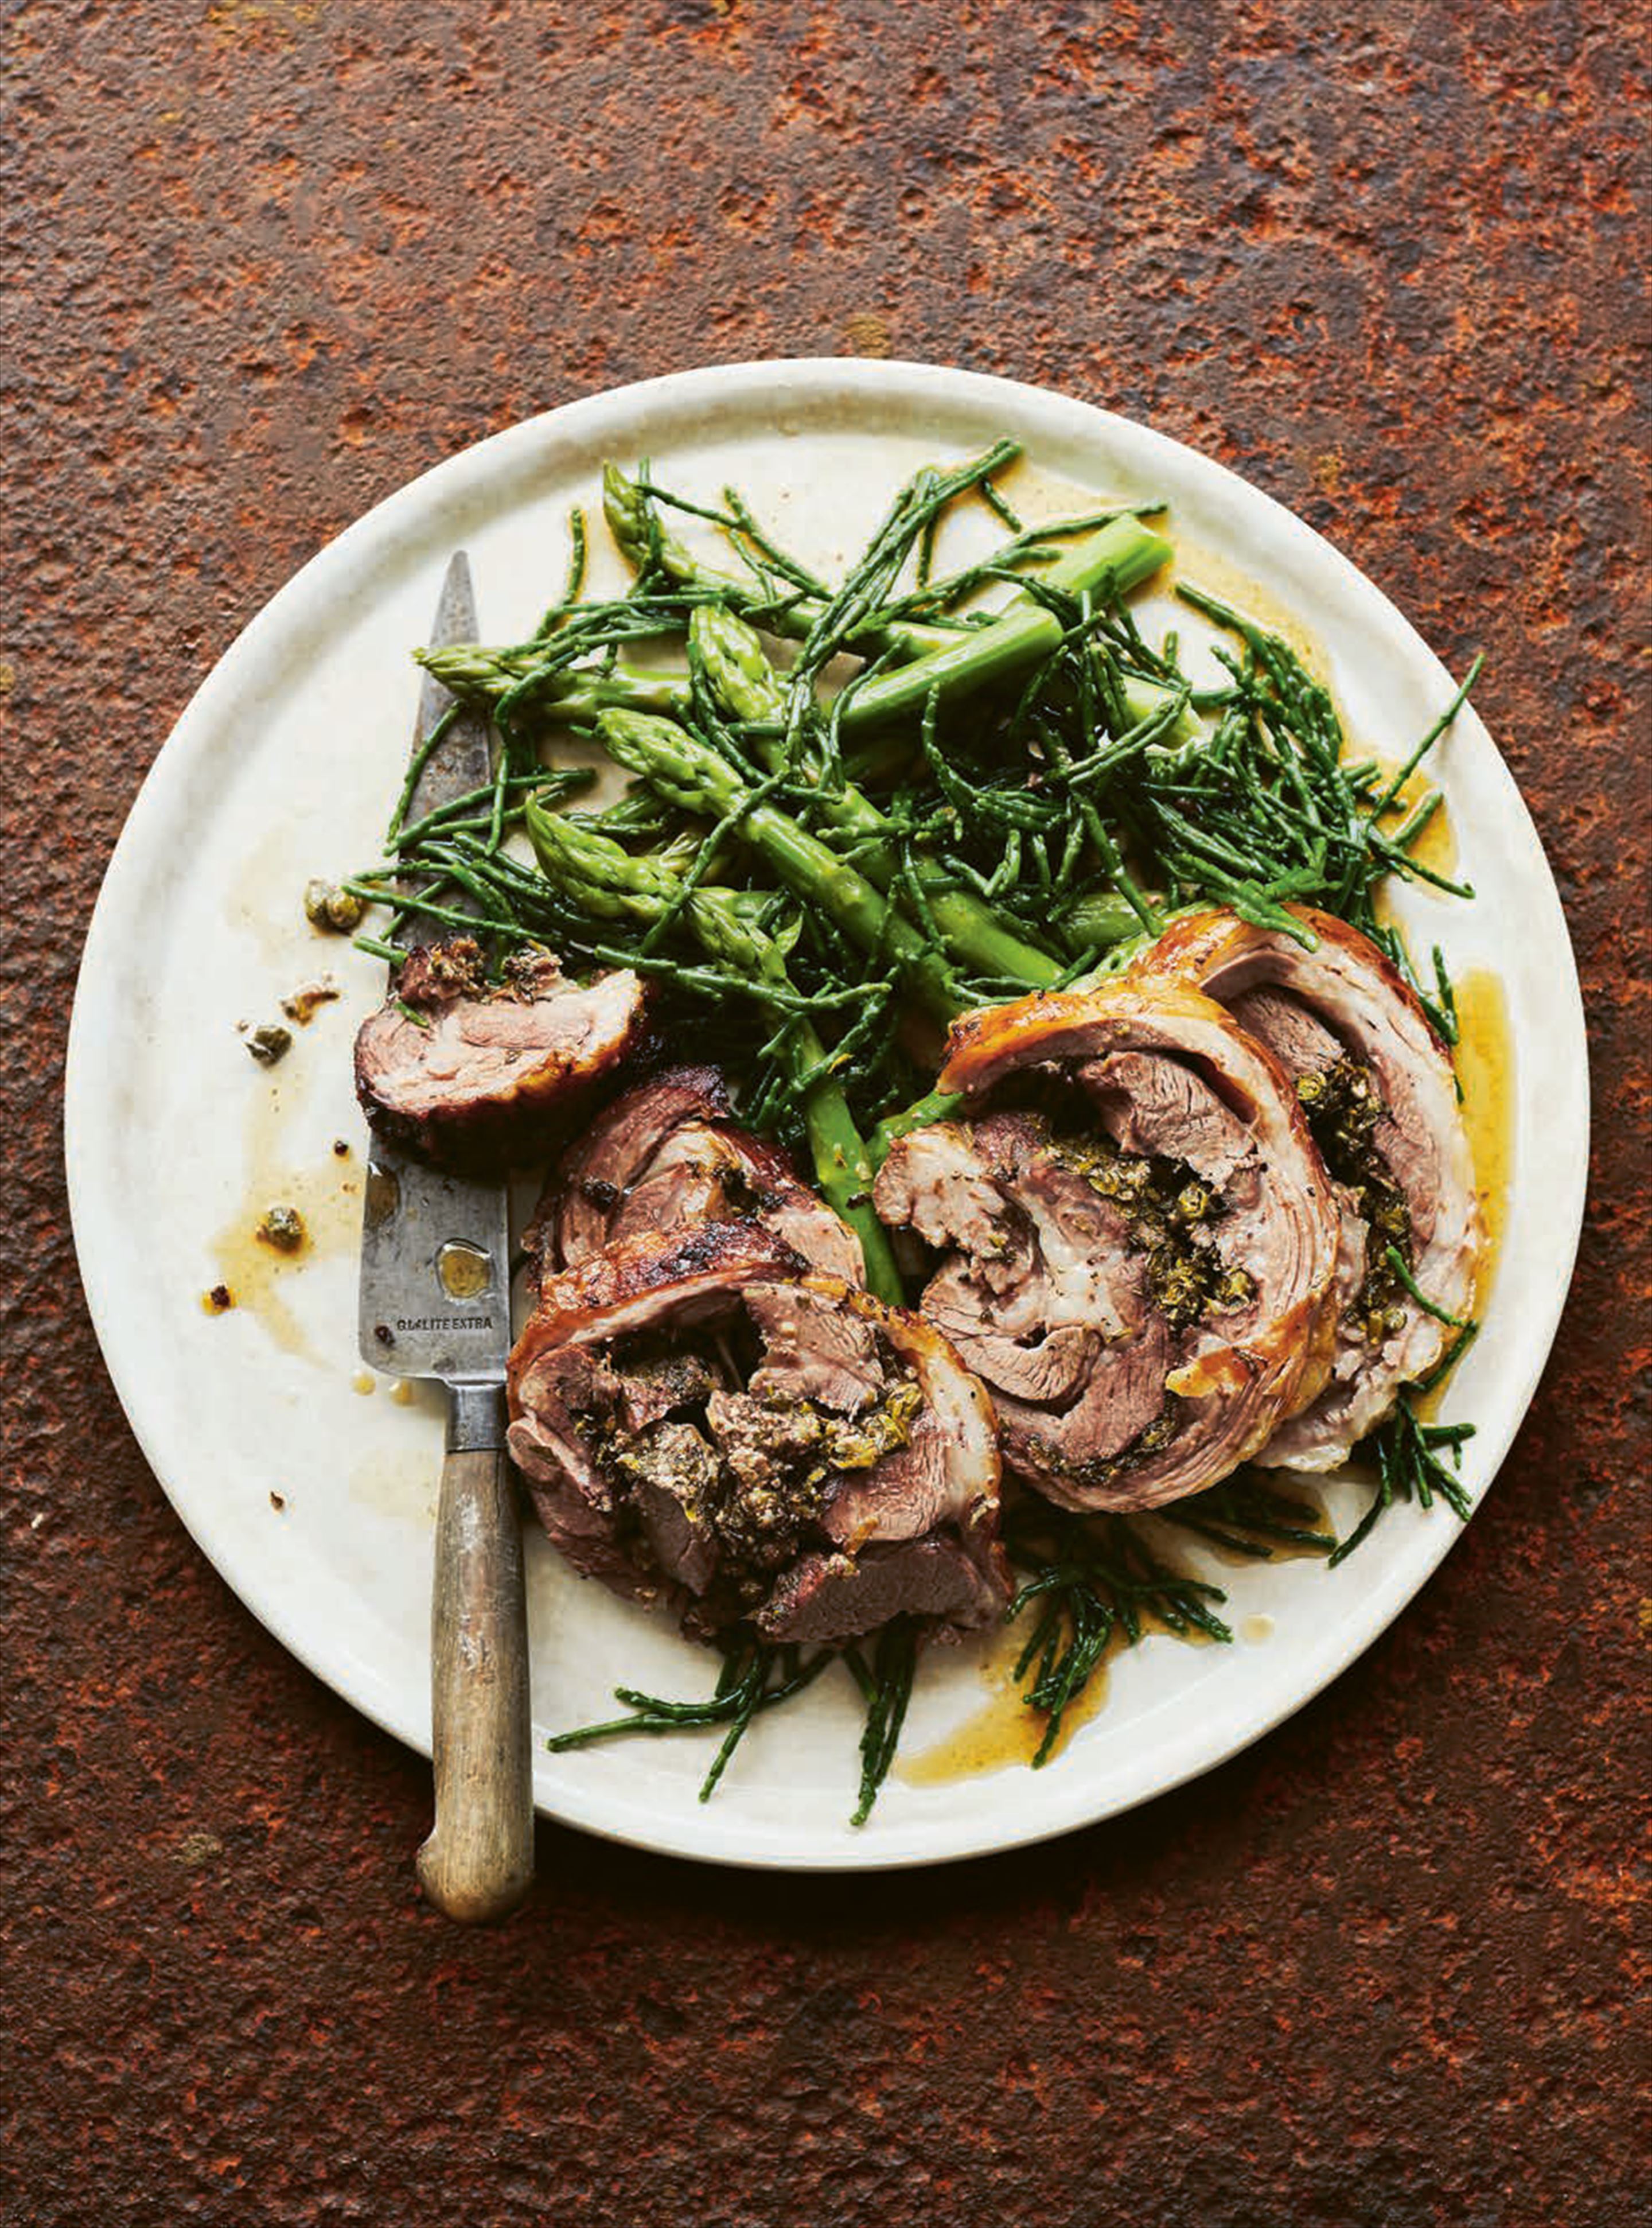 Slow-cooked lamb shoulder with asparagus & samphire